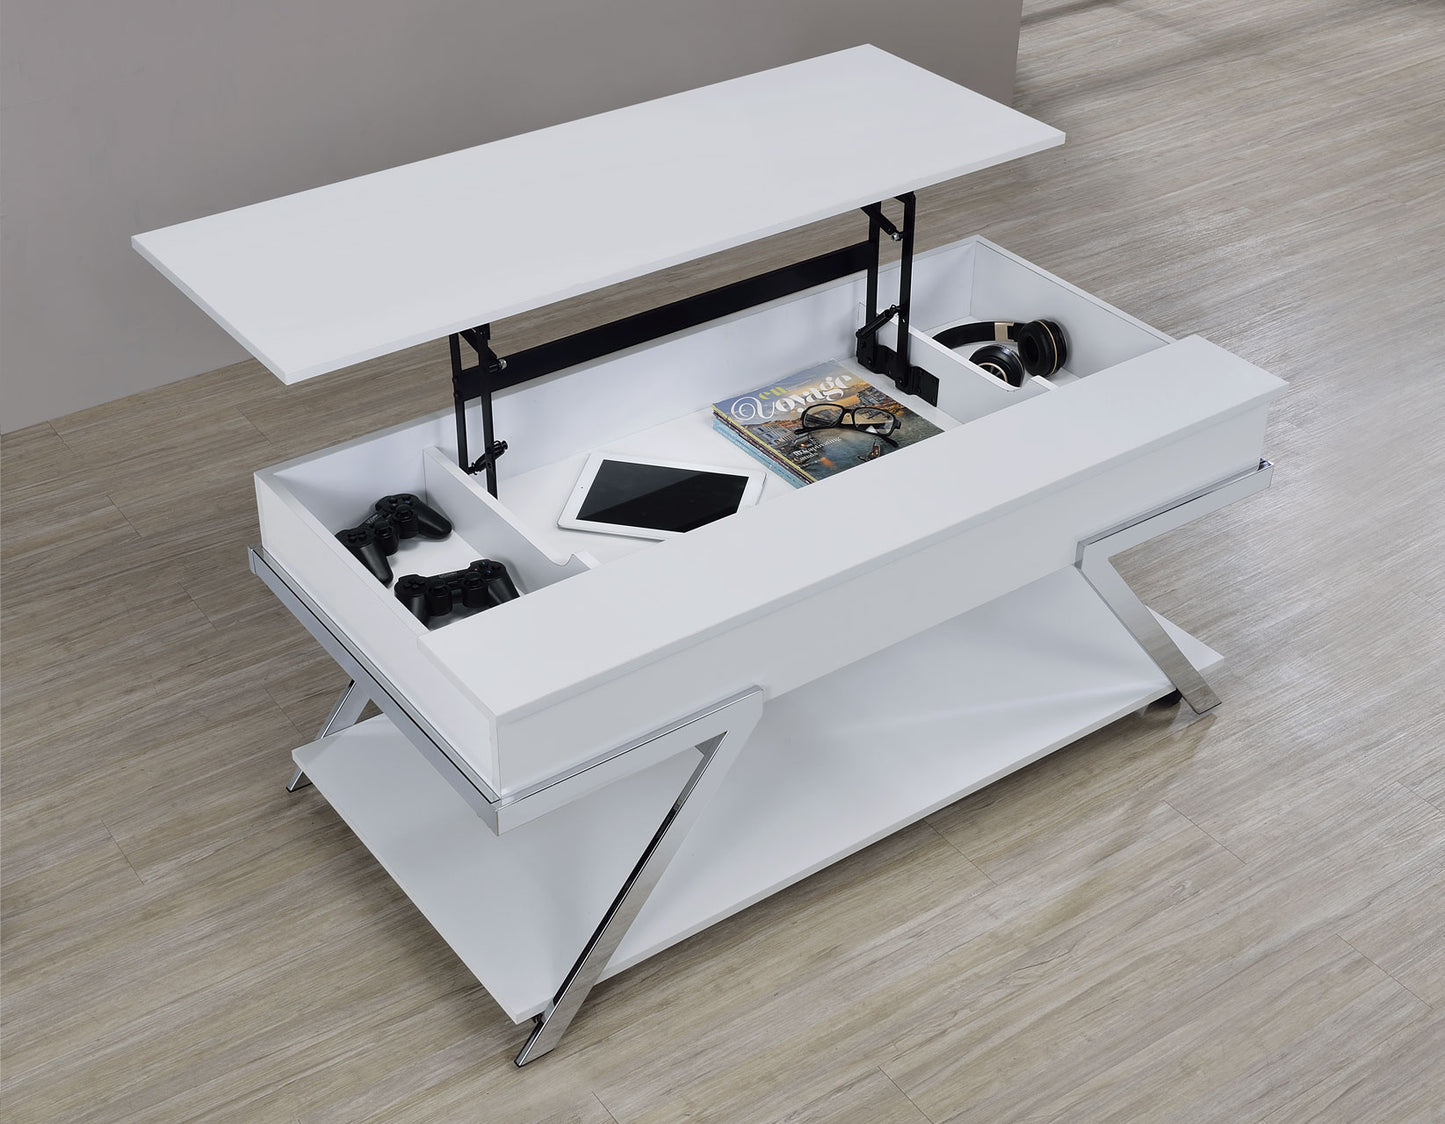 Zena Lift-Top Cocktail Table with Casters